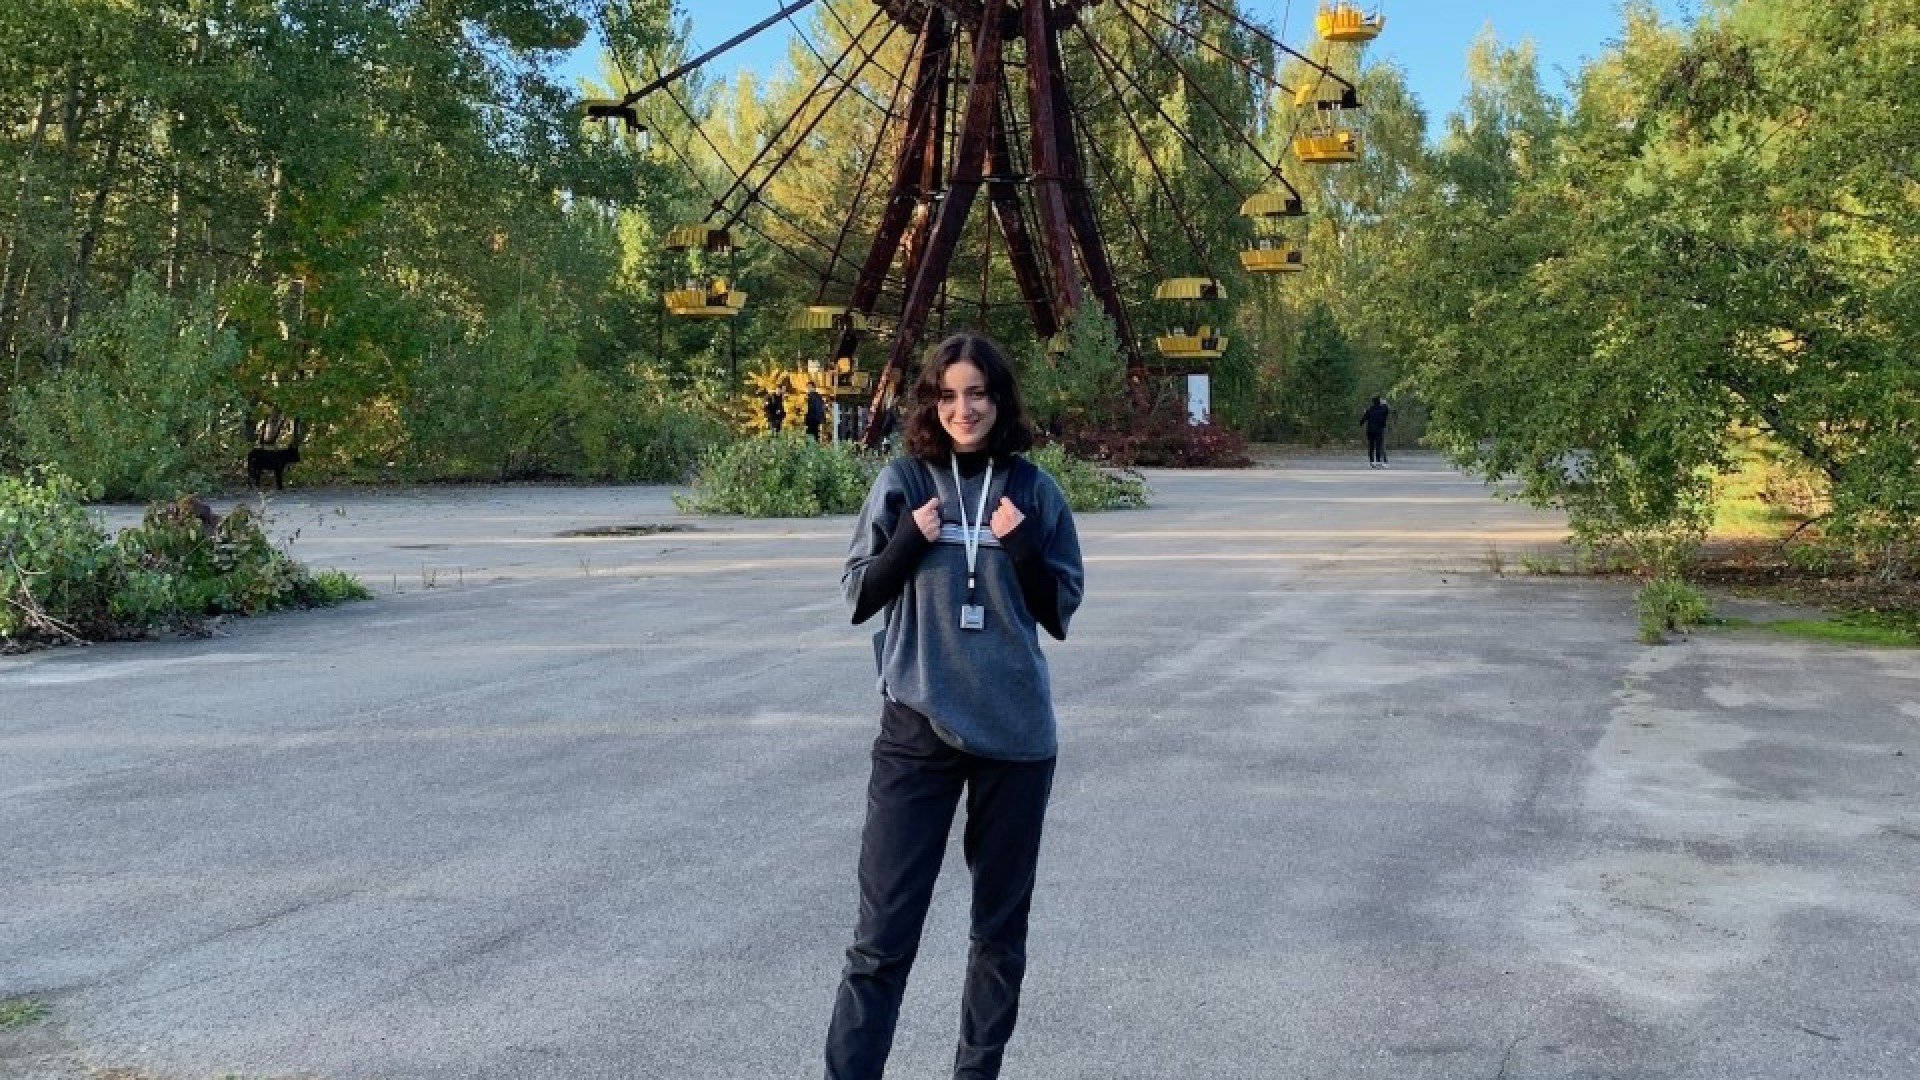 Sophie in Chernobyl with defunct Ferris wheel in the background